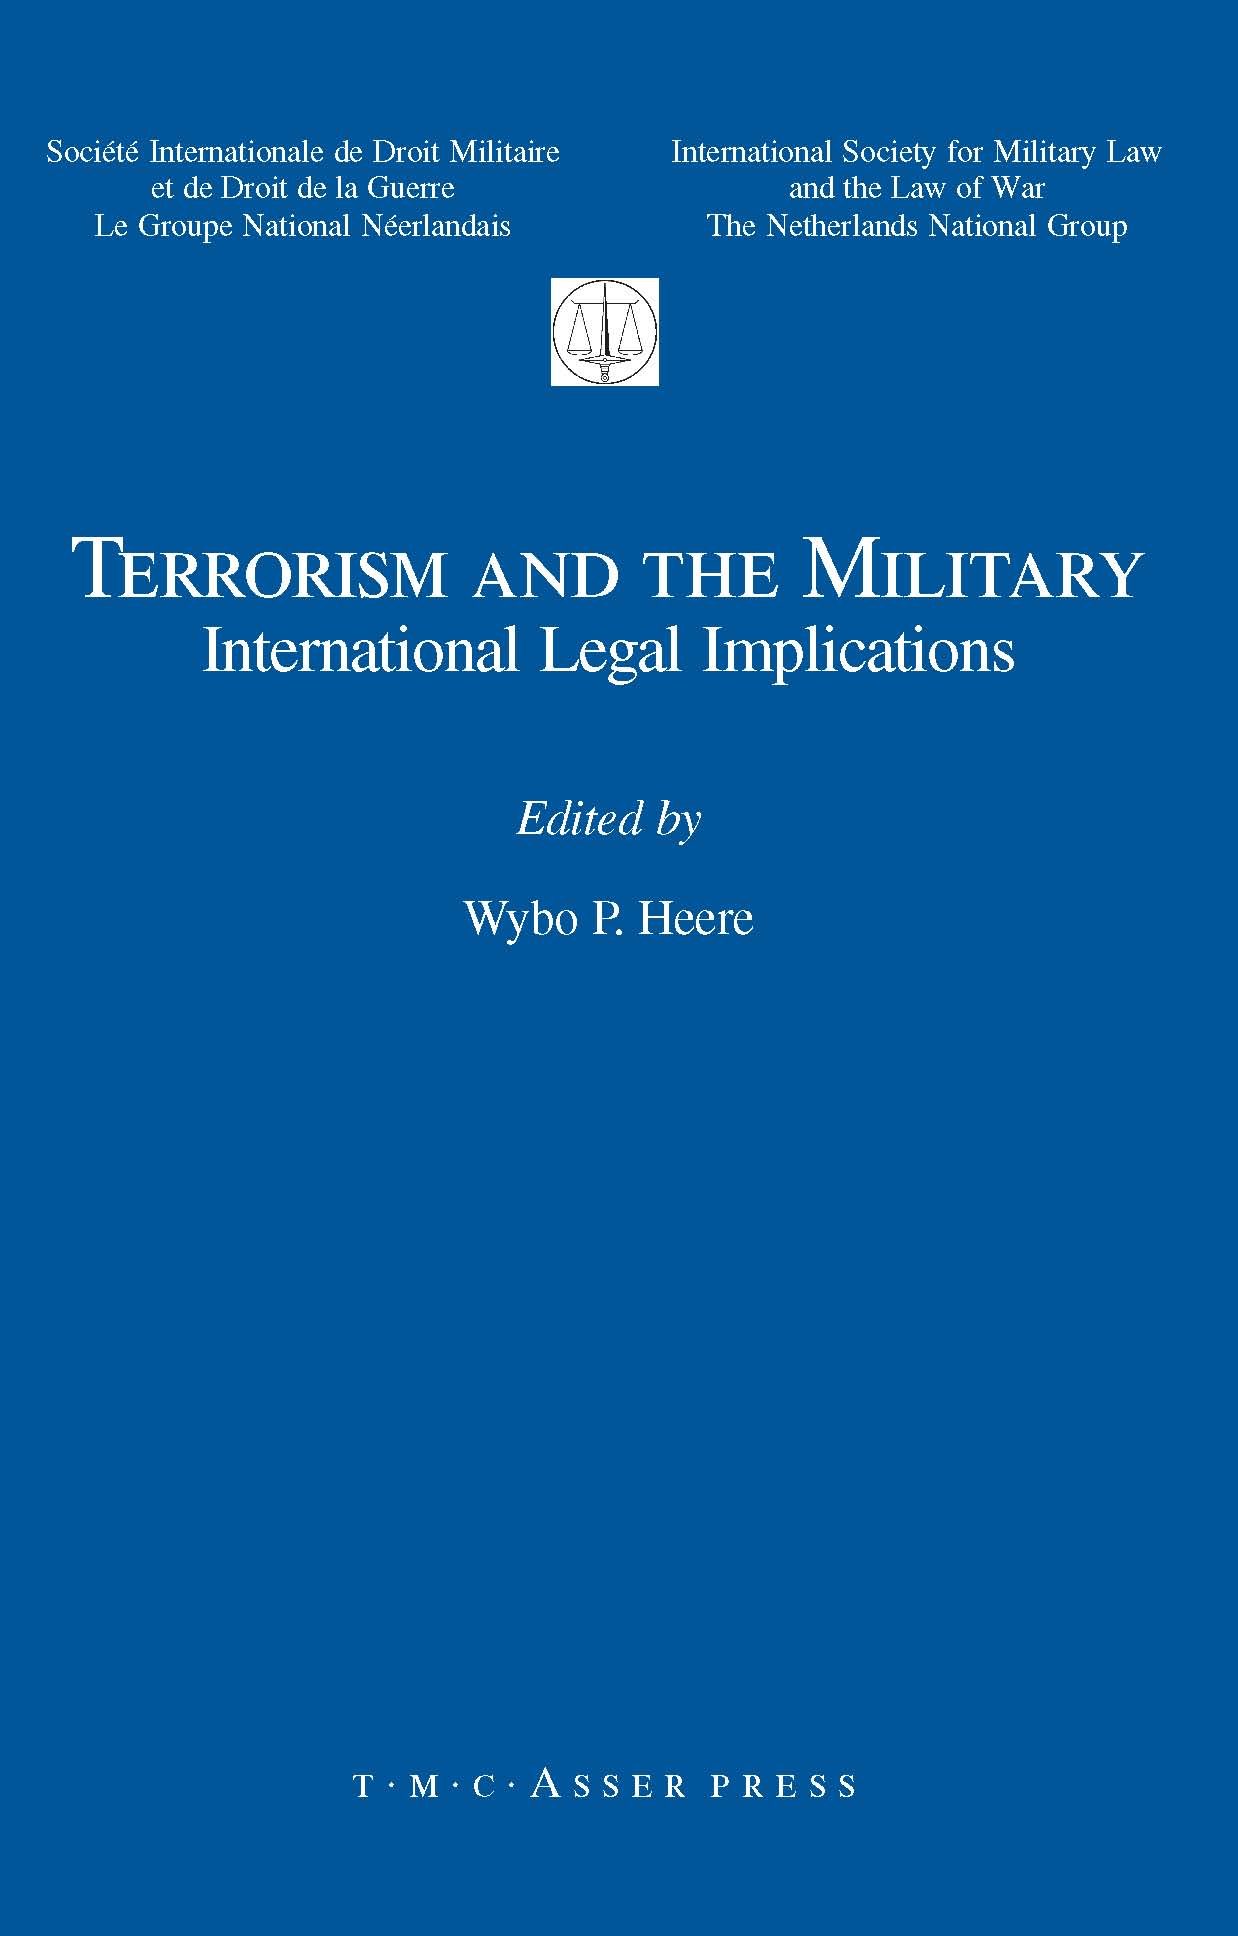 Terrorism and the Military - International Legal Implications